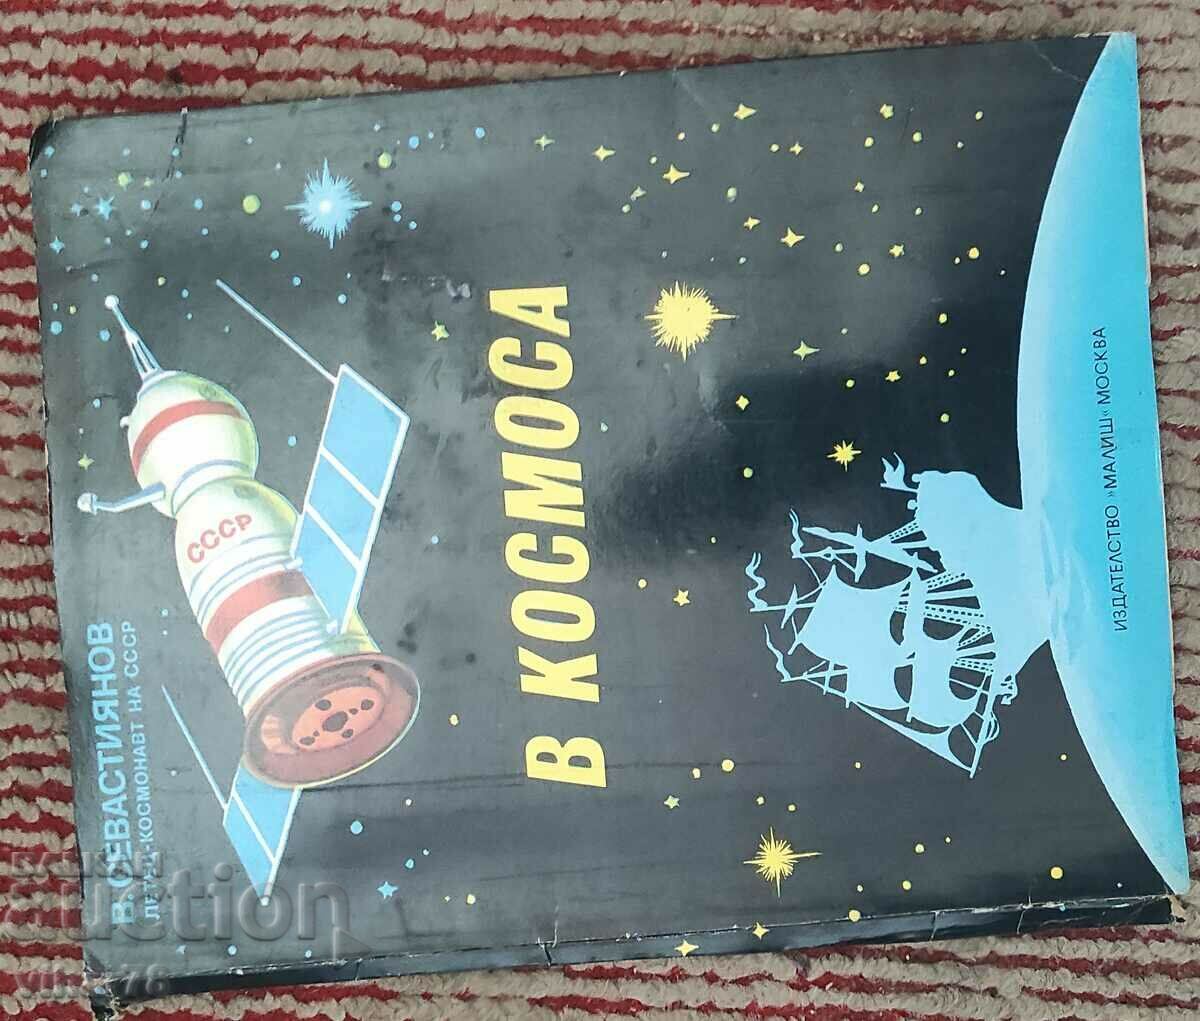 BOOK ---IN SPACE